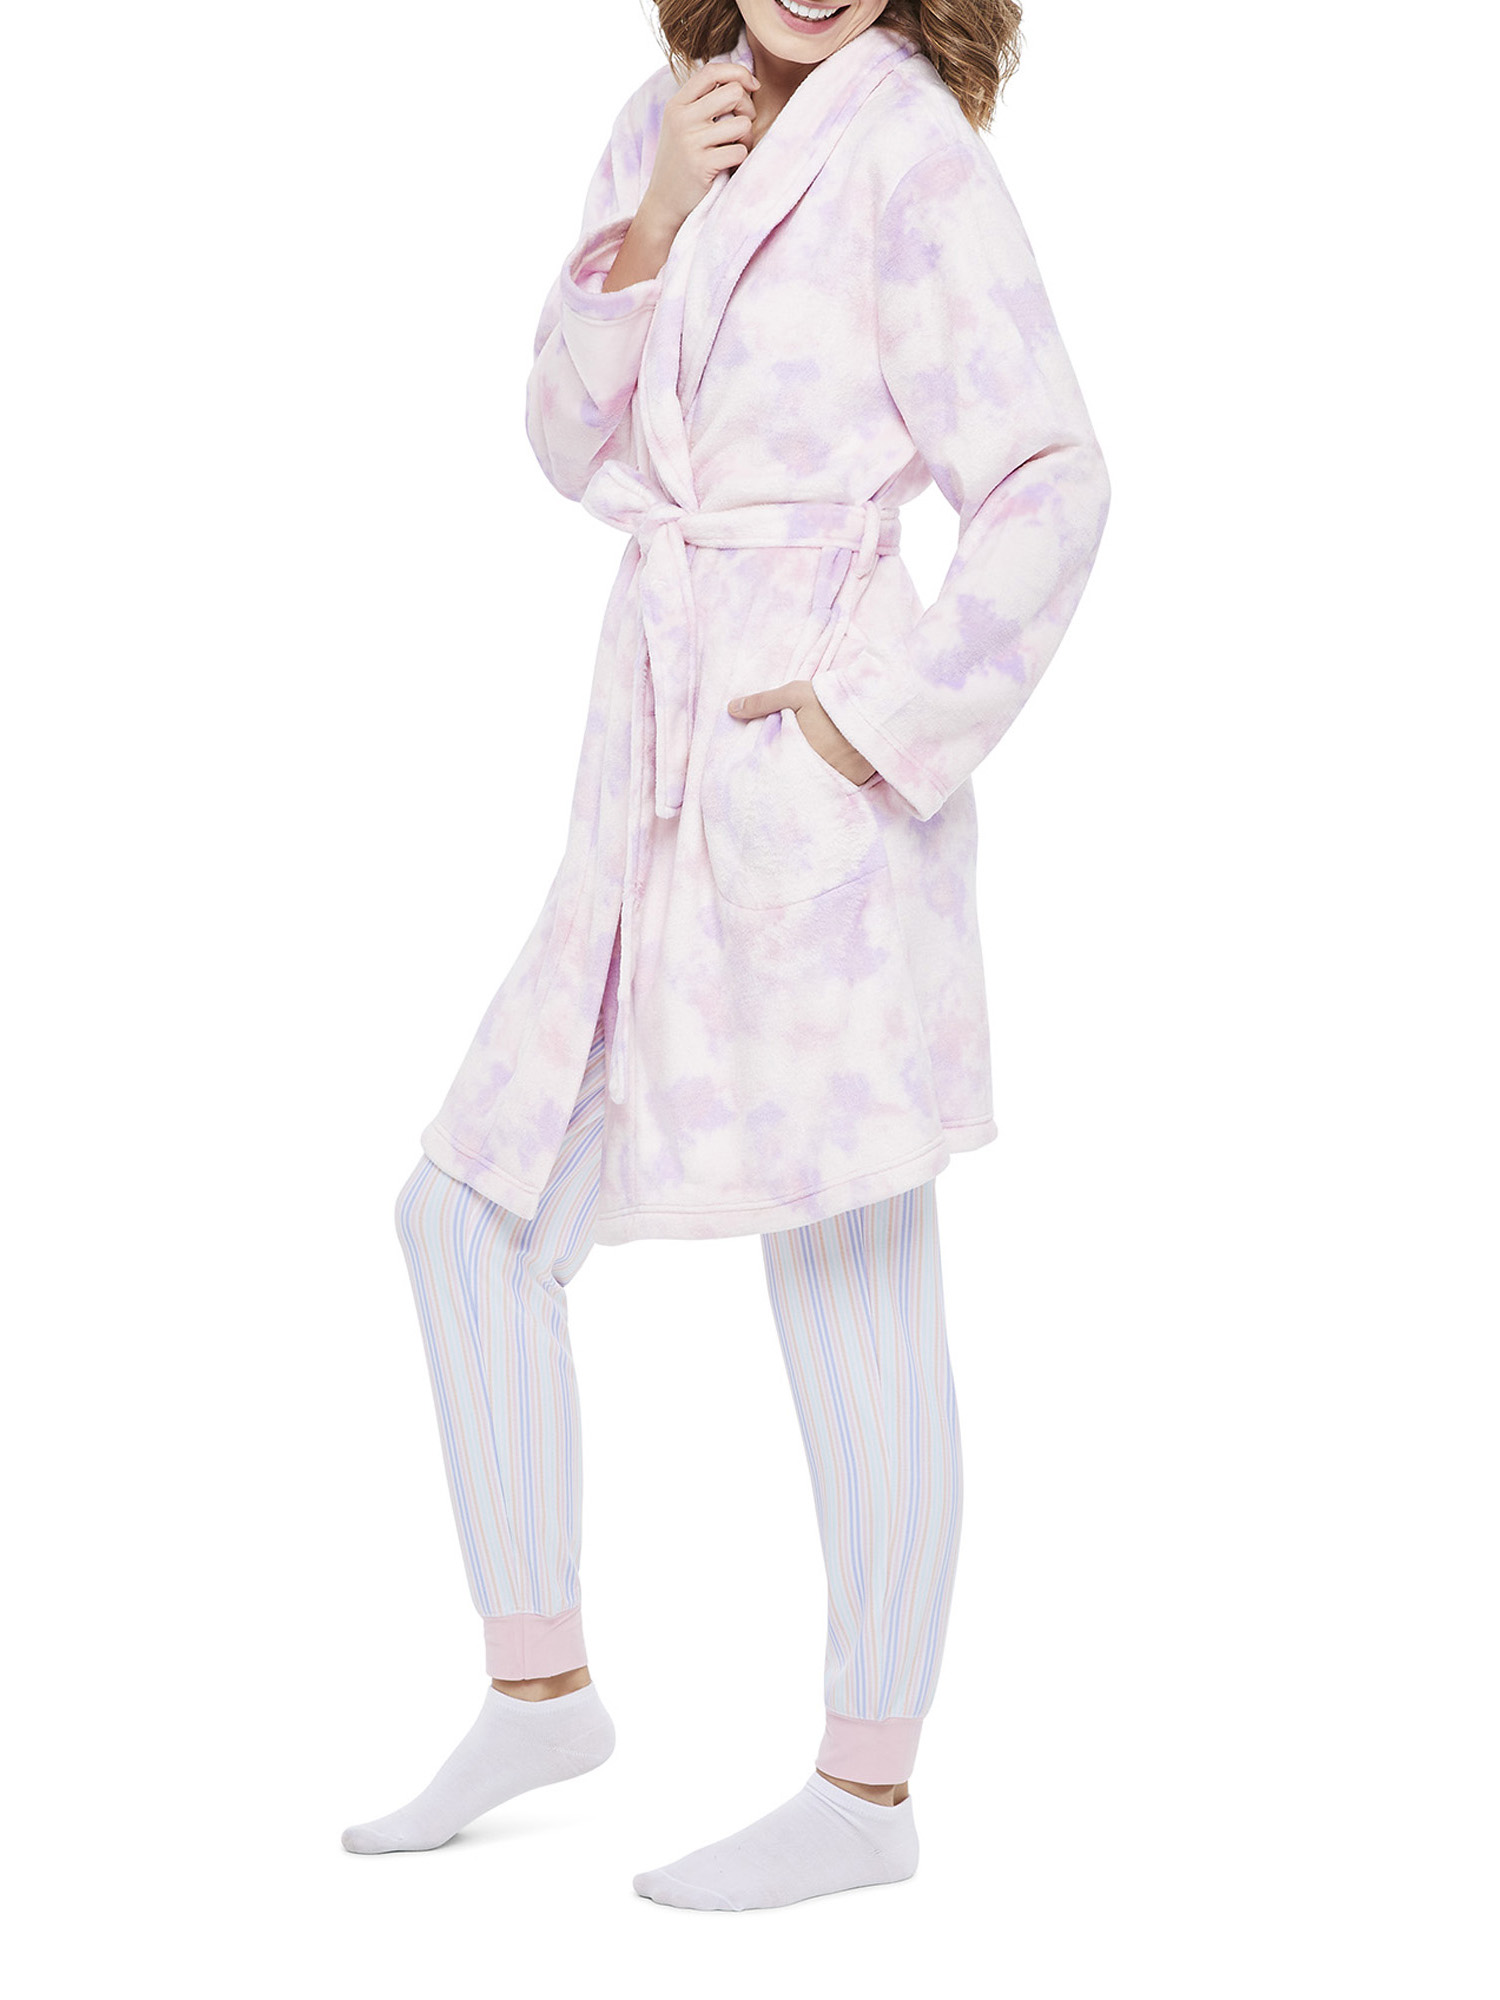 George Women's and Women's Plus Robe - image 5 of 6